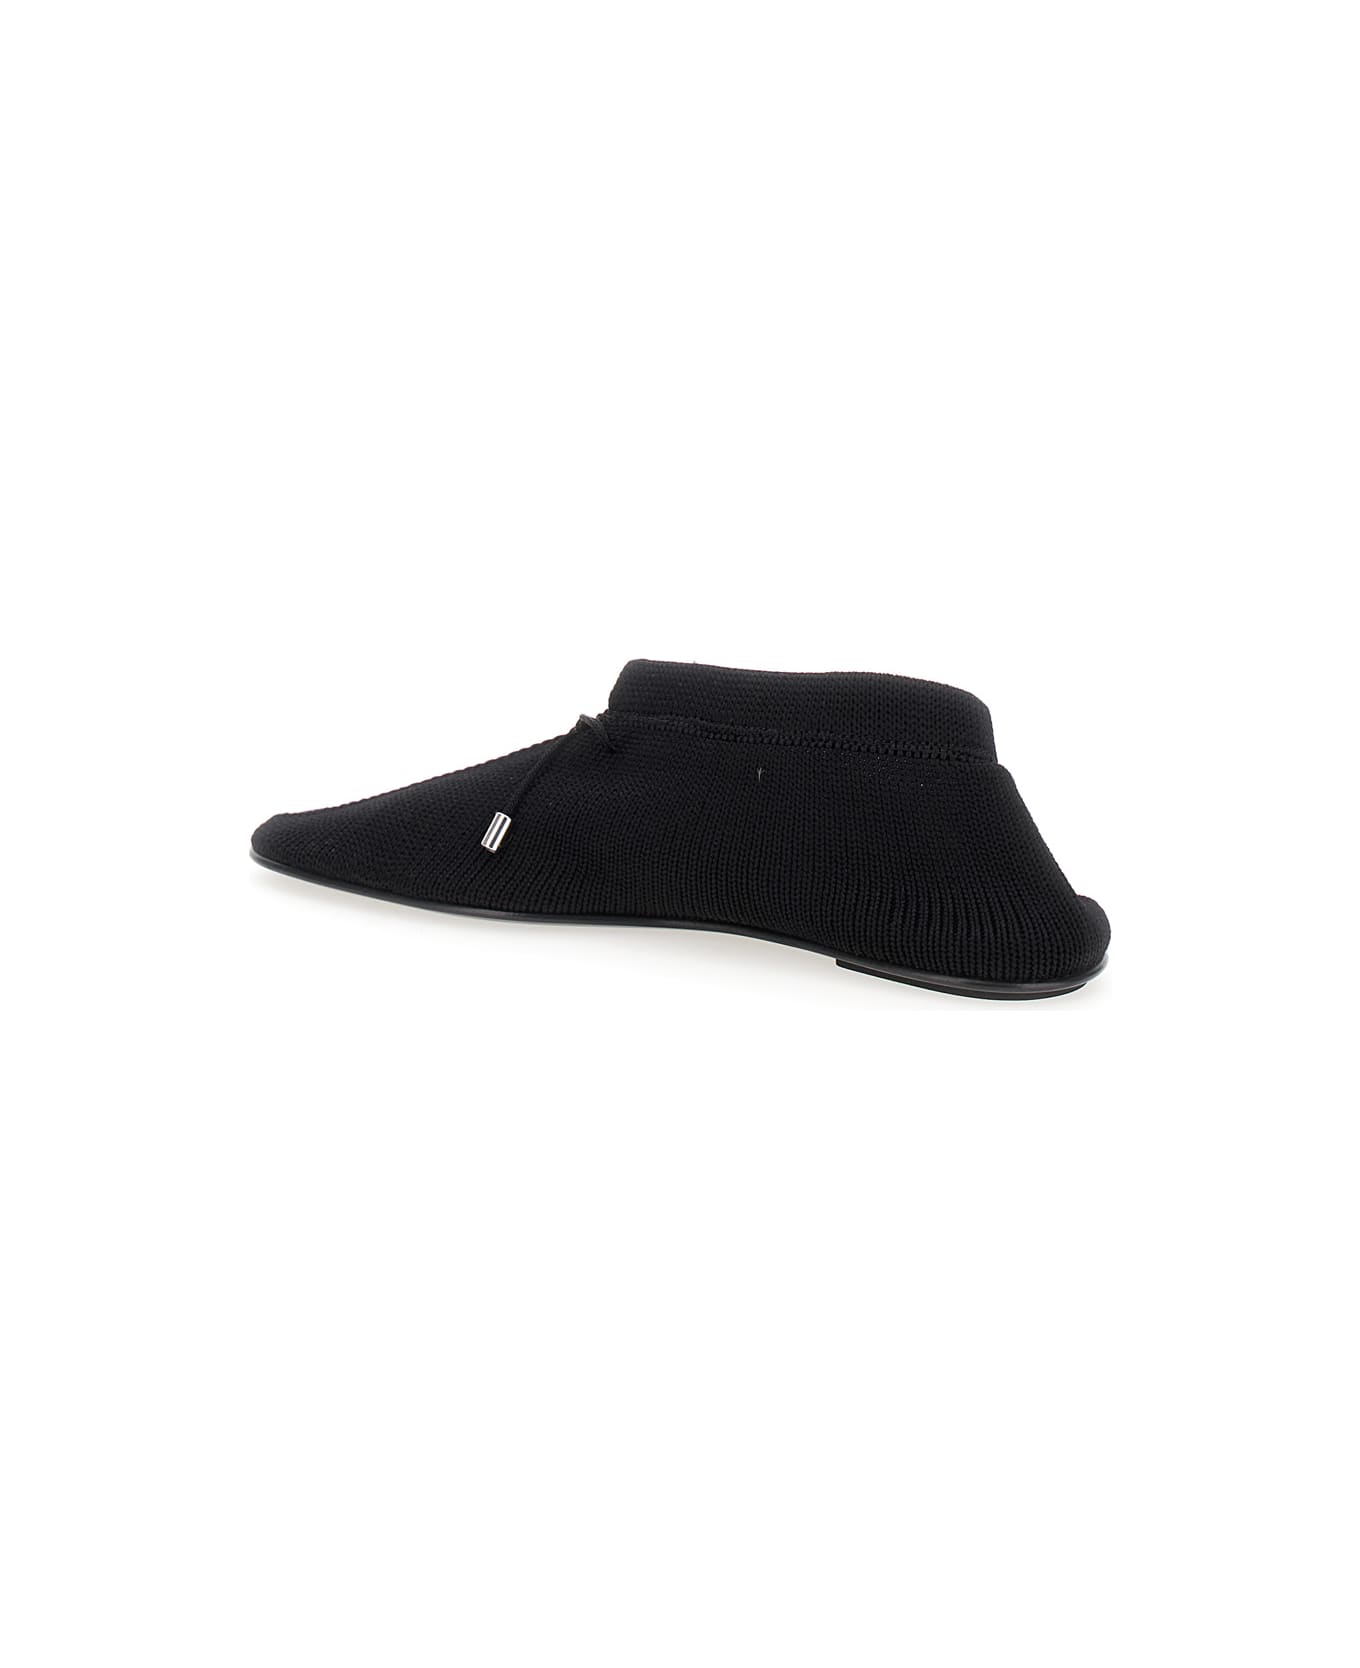 Totême Black Ballet Flats With Bow Detail In Knit Woman - BLACK フラットシューズ